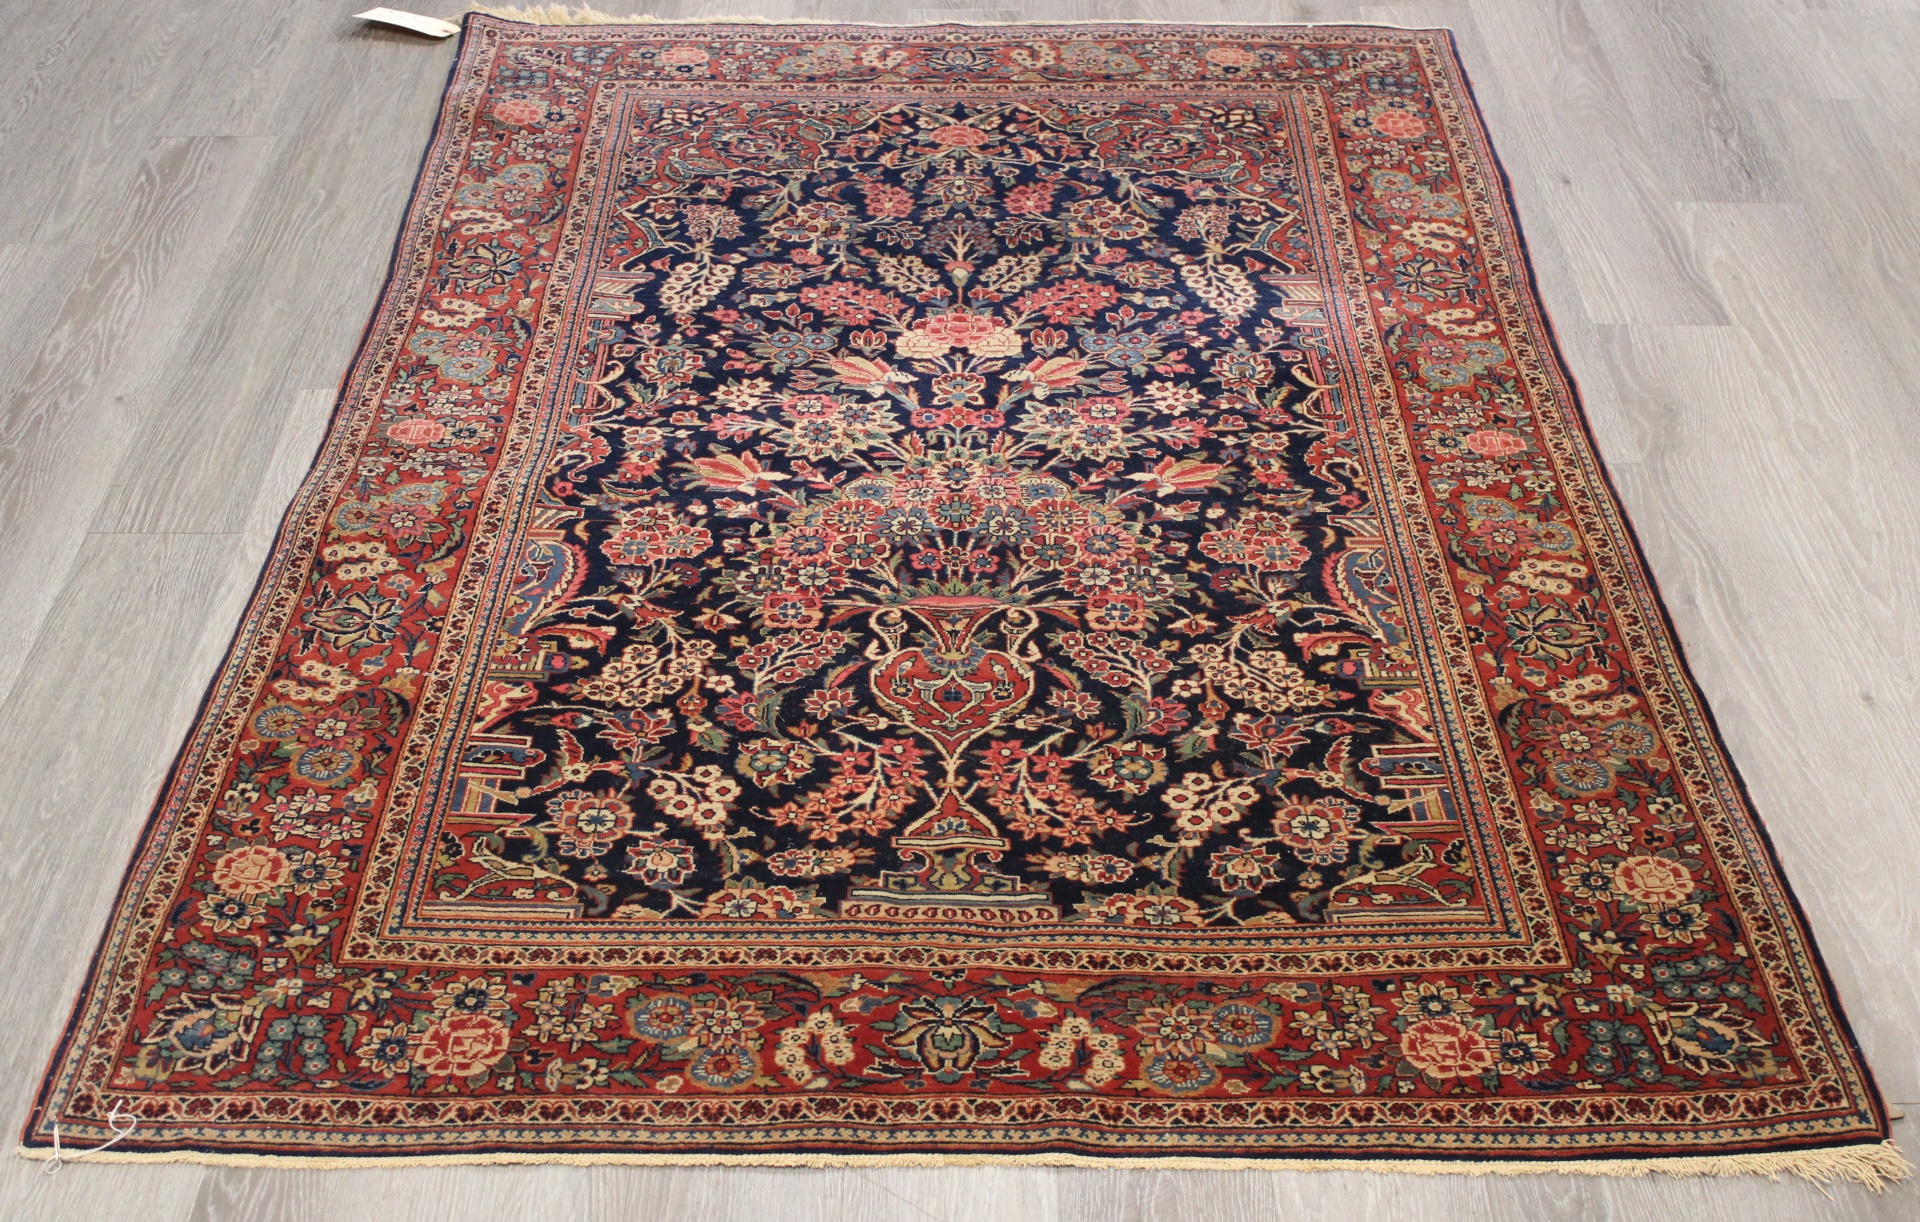 ANTIQUE AND FINELY WOVEN KASHAN